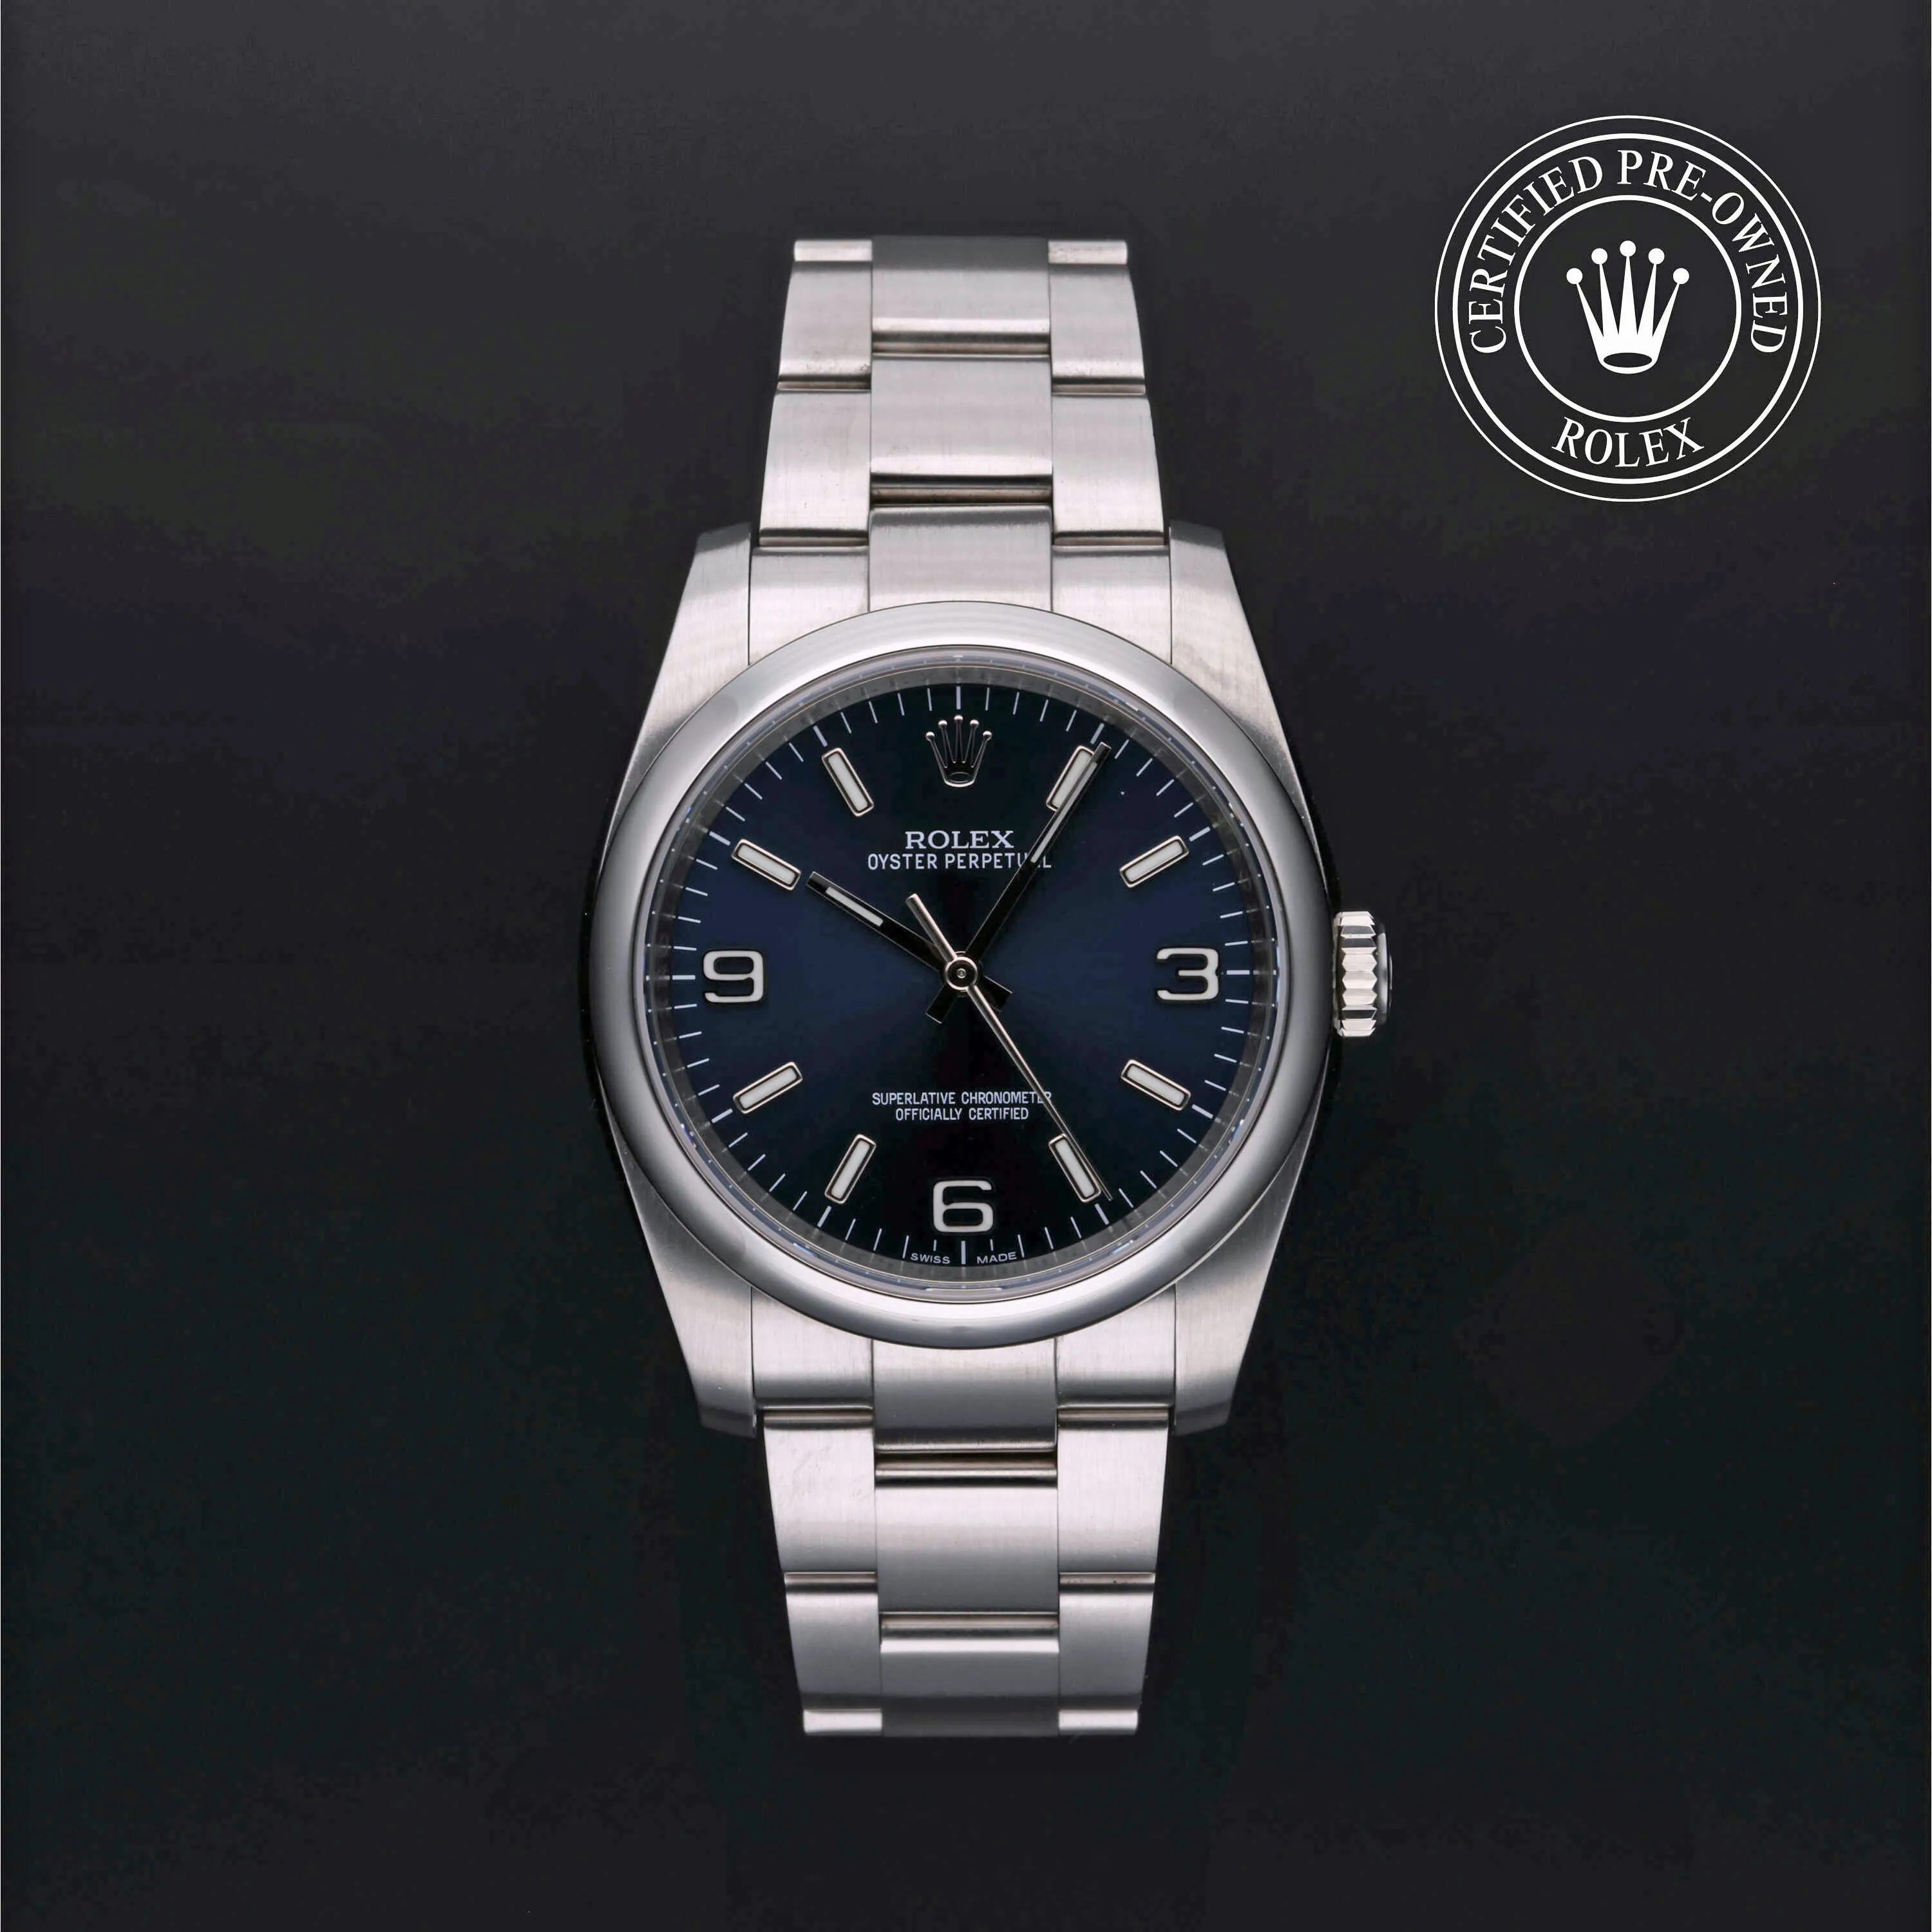 Rolex Oyster Perpetual 36 116000 36mm Stainless steel Blue